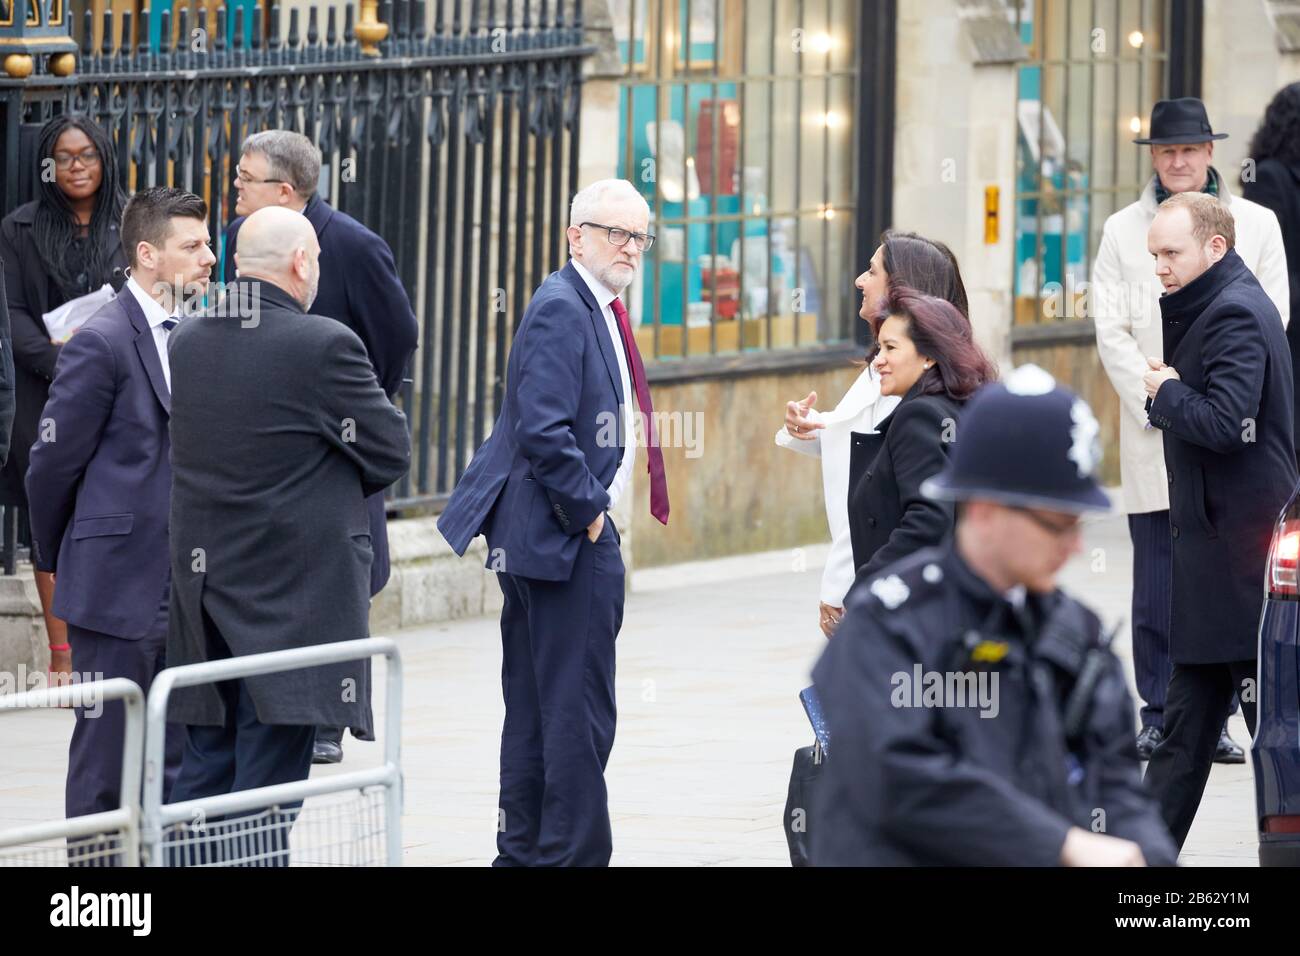 London, U.K. - 9 Mar 2020: Jeremy Corbyn, outgoing Labour Party leader arriving for the Commonwealth Day Service at Westminster Abbey. Stock Photo